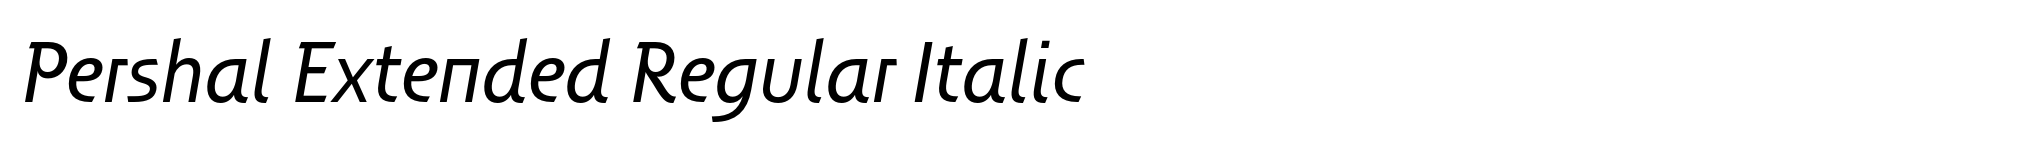 Pershal Extended Regular Italic image